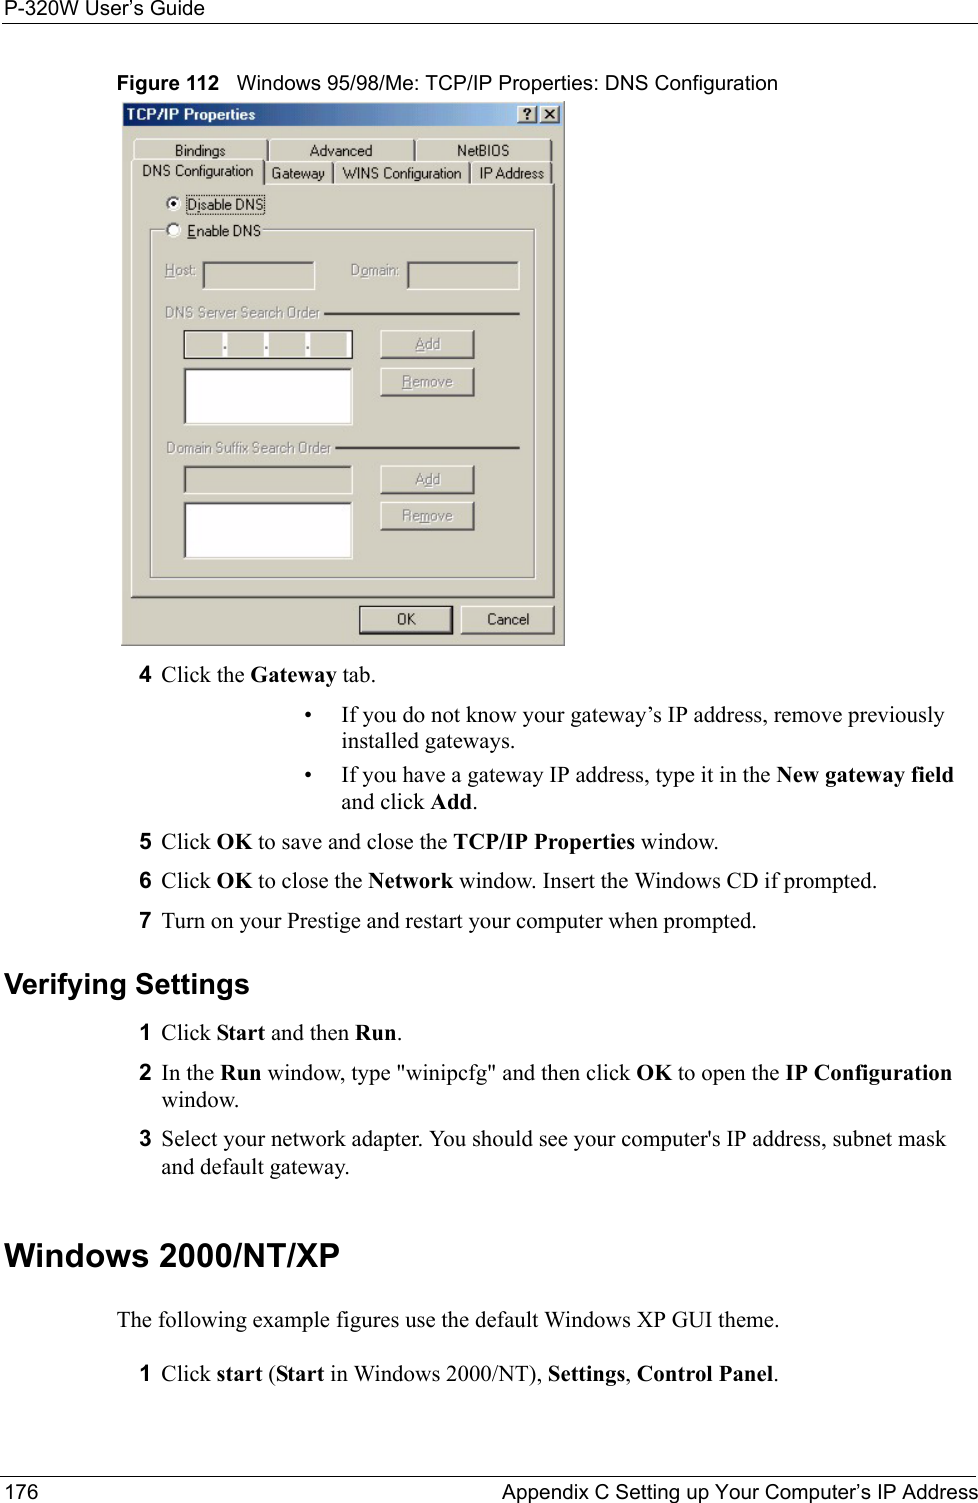 P-320W User’s Guide176  Appendix C Setting up Your Computer’s IP AddressFigure 112   Windows 95/98/Me: TCP/IP Properties: DNS Configuration4Click the Gateway tab.• If you do not know your gateway’s IP address, remove previously installed gateways.• If you have a gateway IP address, type it in the New gateway field and click Add.5Click OK to save and close the TCP/IP Properties window.6Click OK to close the Network window. Insert the Windows CD if prompted.7Turn on your Prestige and restart your computer when prompted.Verifying Settings1Click Start and then Run.2In the Run window, type &quot;winipcfg&quot; and then click OK to open the IP Configuration window.3Select your network adapter. You should see your computer&apos;s IP address, subnet mask and default gateway.Windows 2000/NT/XPThe following example figures use the default Windows XP GUI theme.1Click start (Start in Windows 2000/NT), Settings, Control Panel.